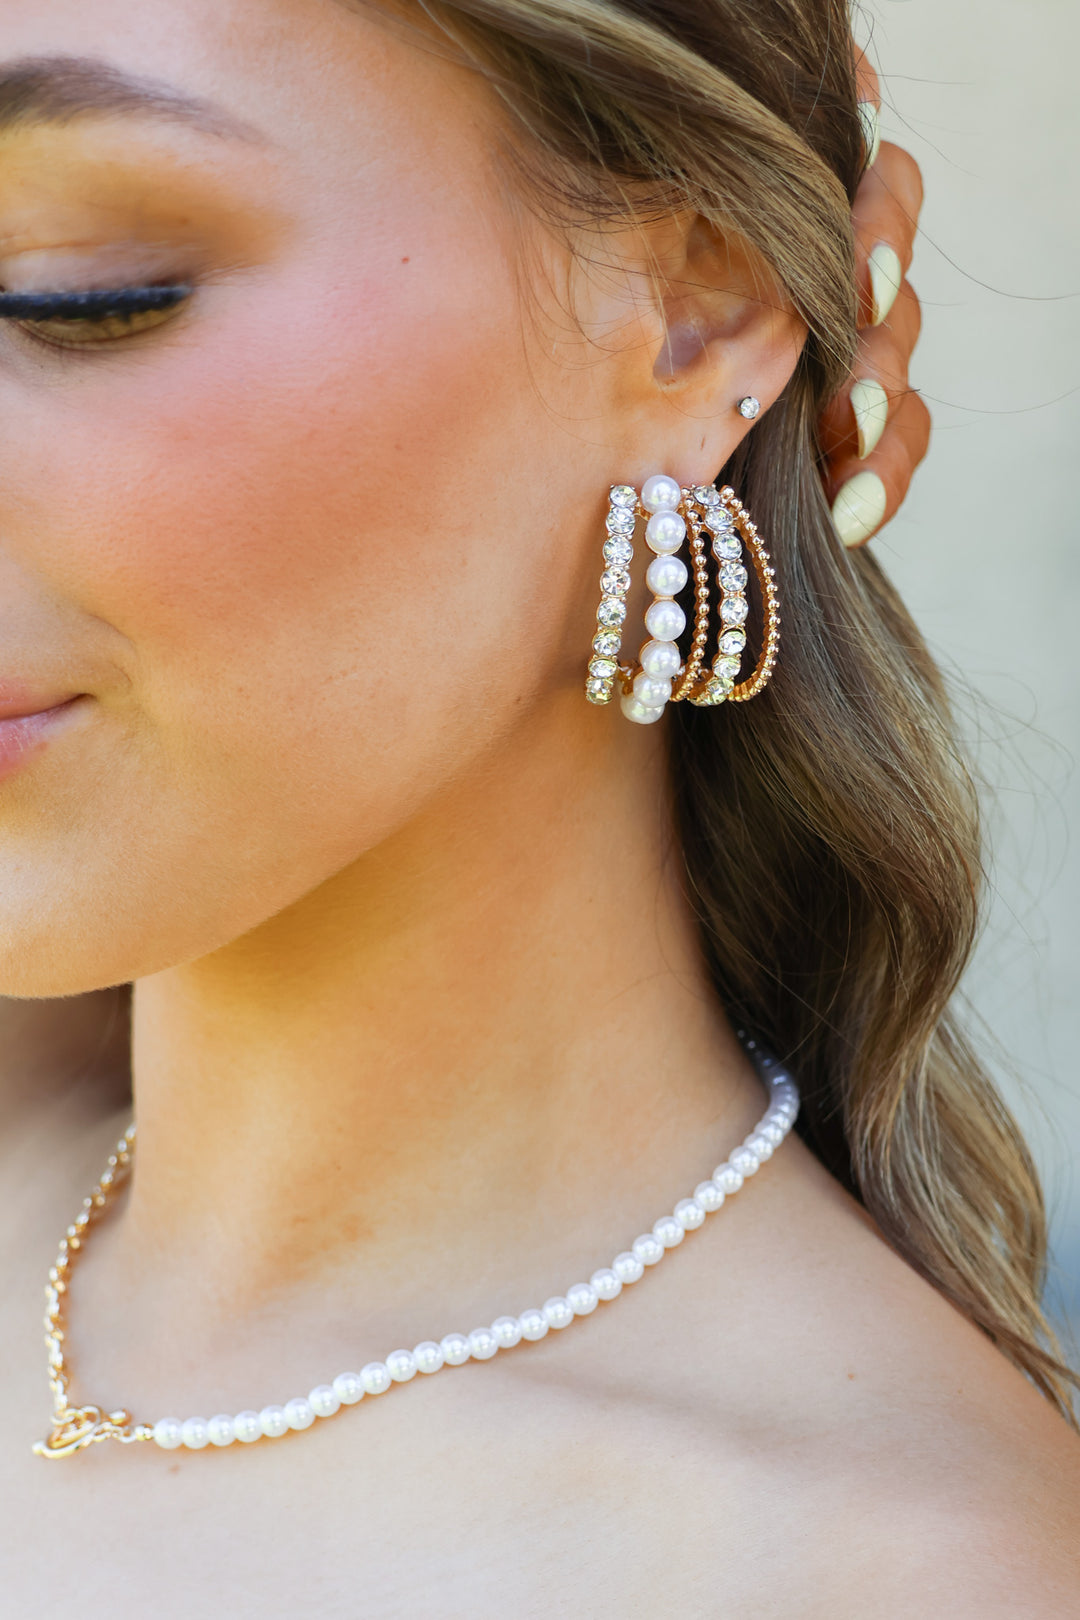 Chic and Sparkling Earrings in Gold - ShopSpoiled